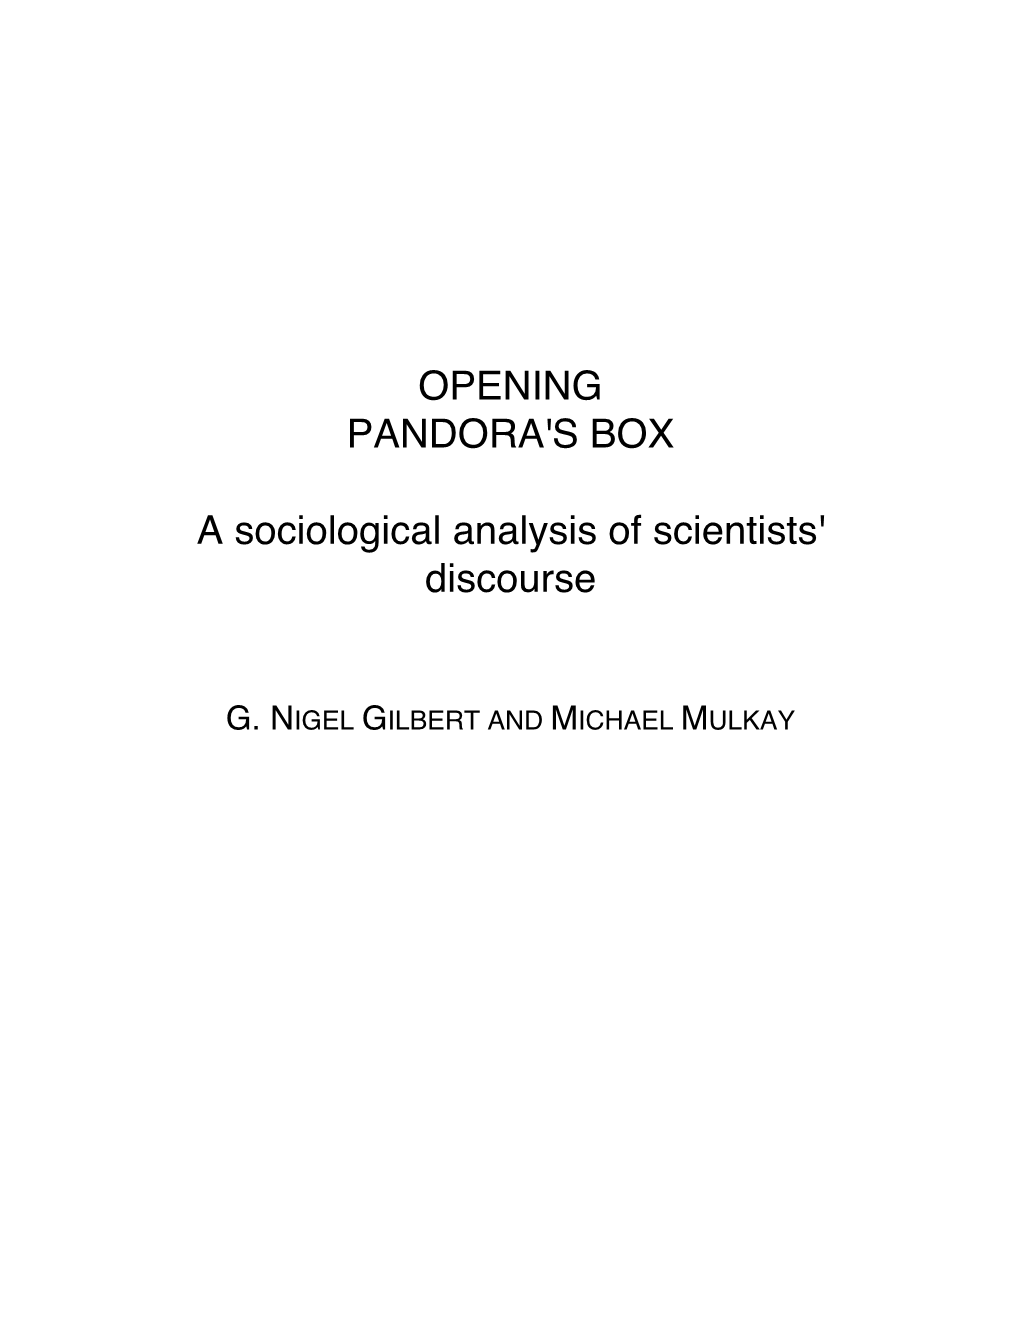 OPENING PANDORA's BOX a Sociological Analysis of Scientists' Discourse G.NIGEL GILBERT Lecturer in Sociology, University of Surrey And